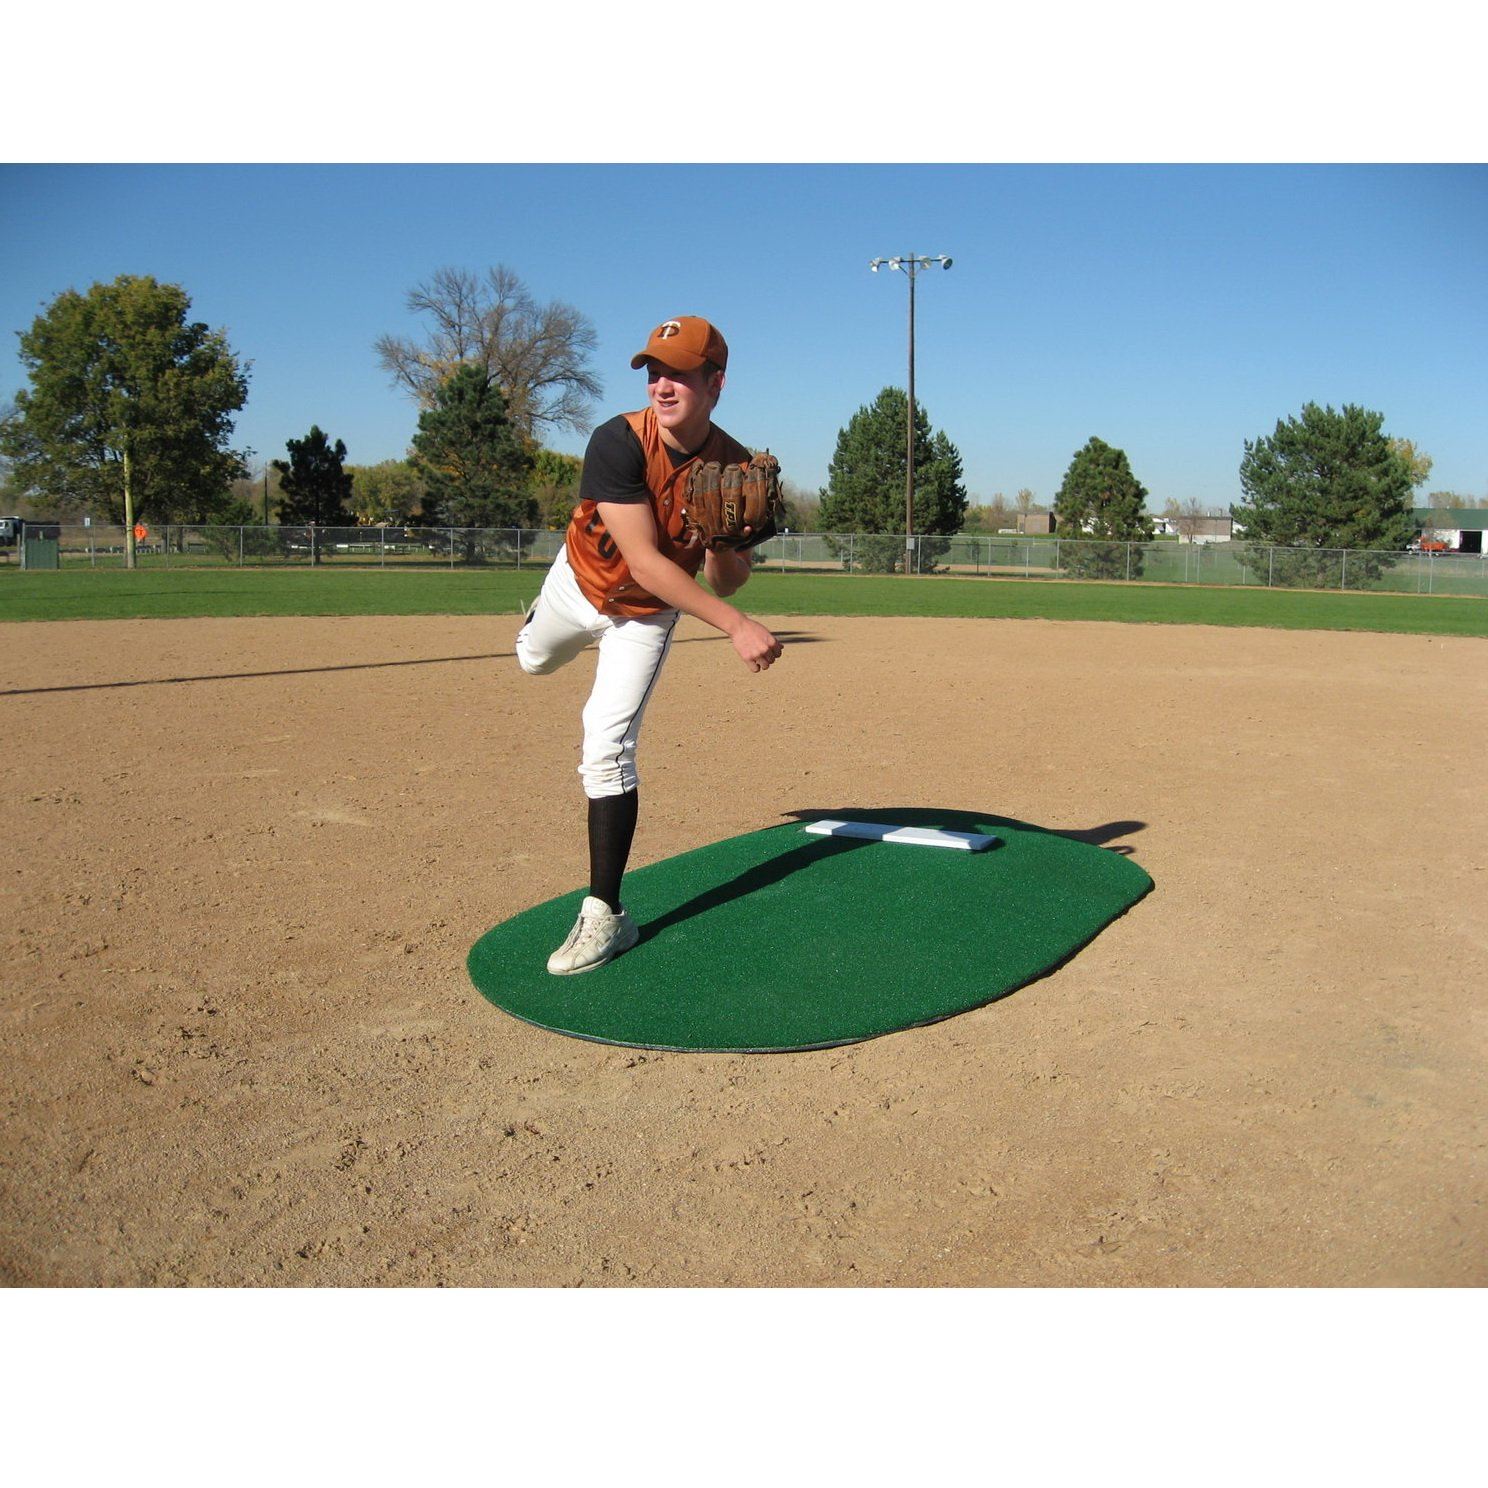 PortoLite 6" Little League Full Length Portable Game Pitching Mound